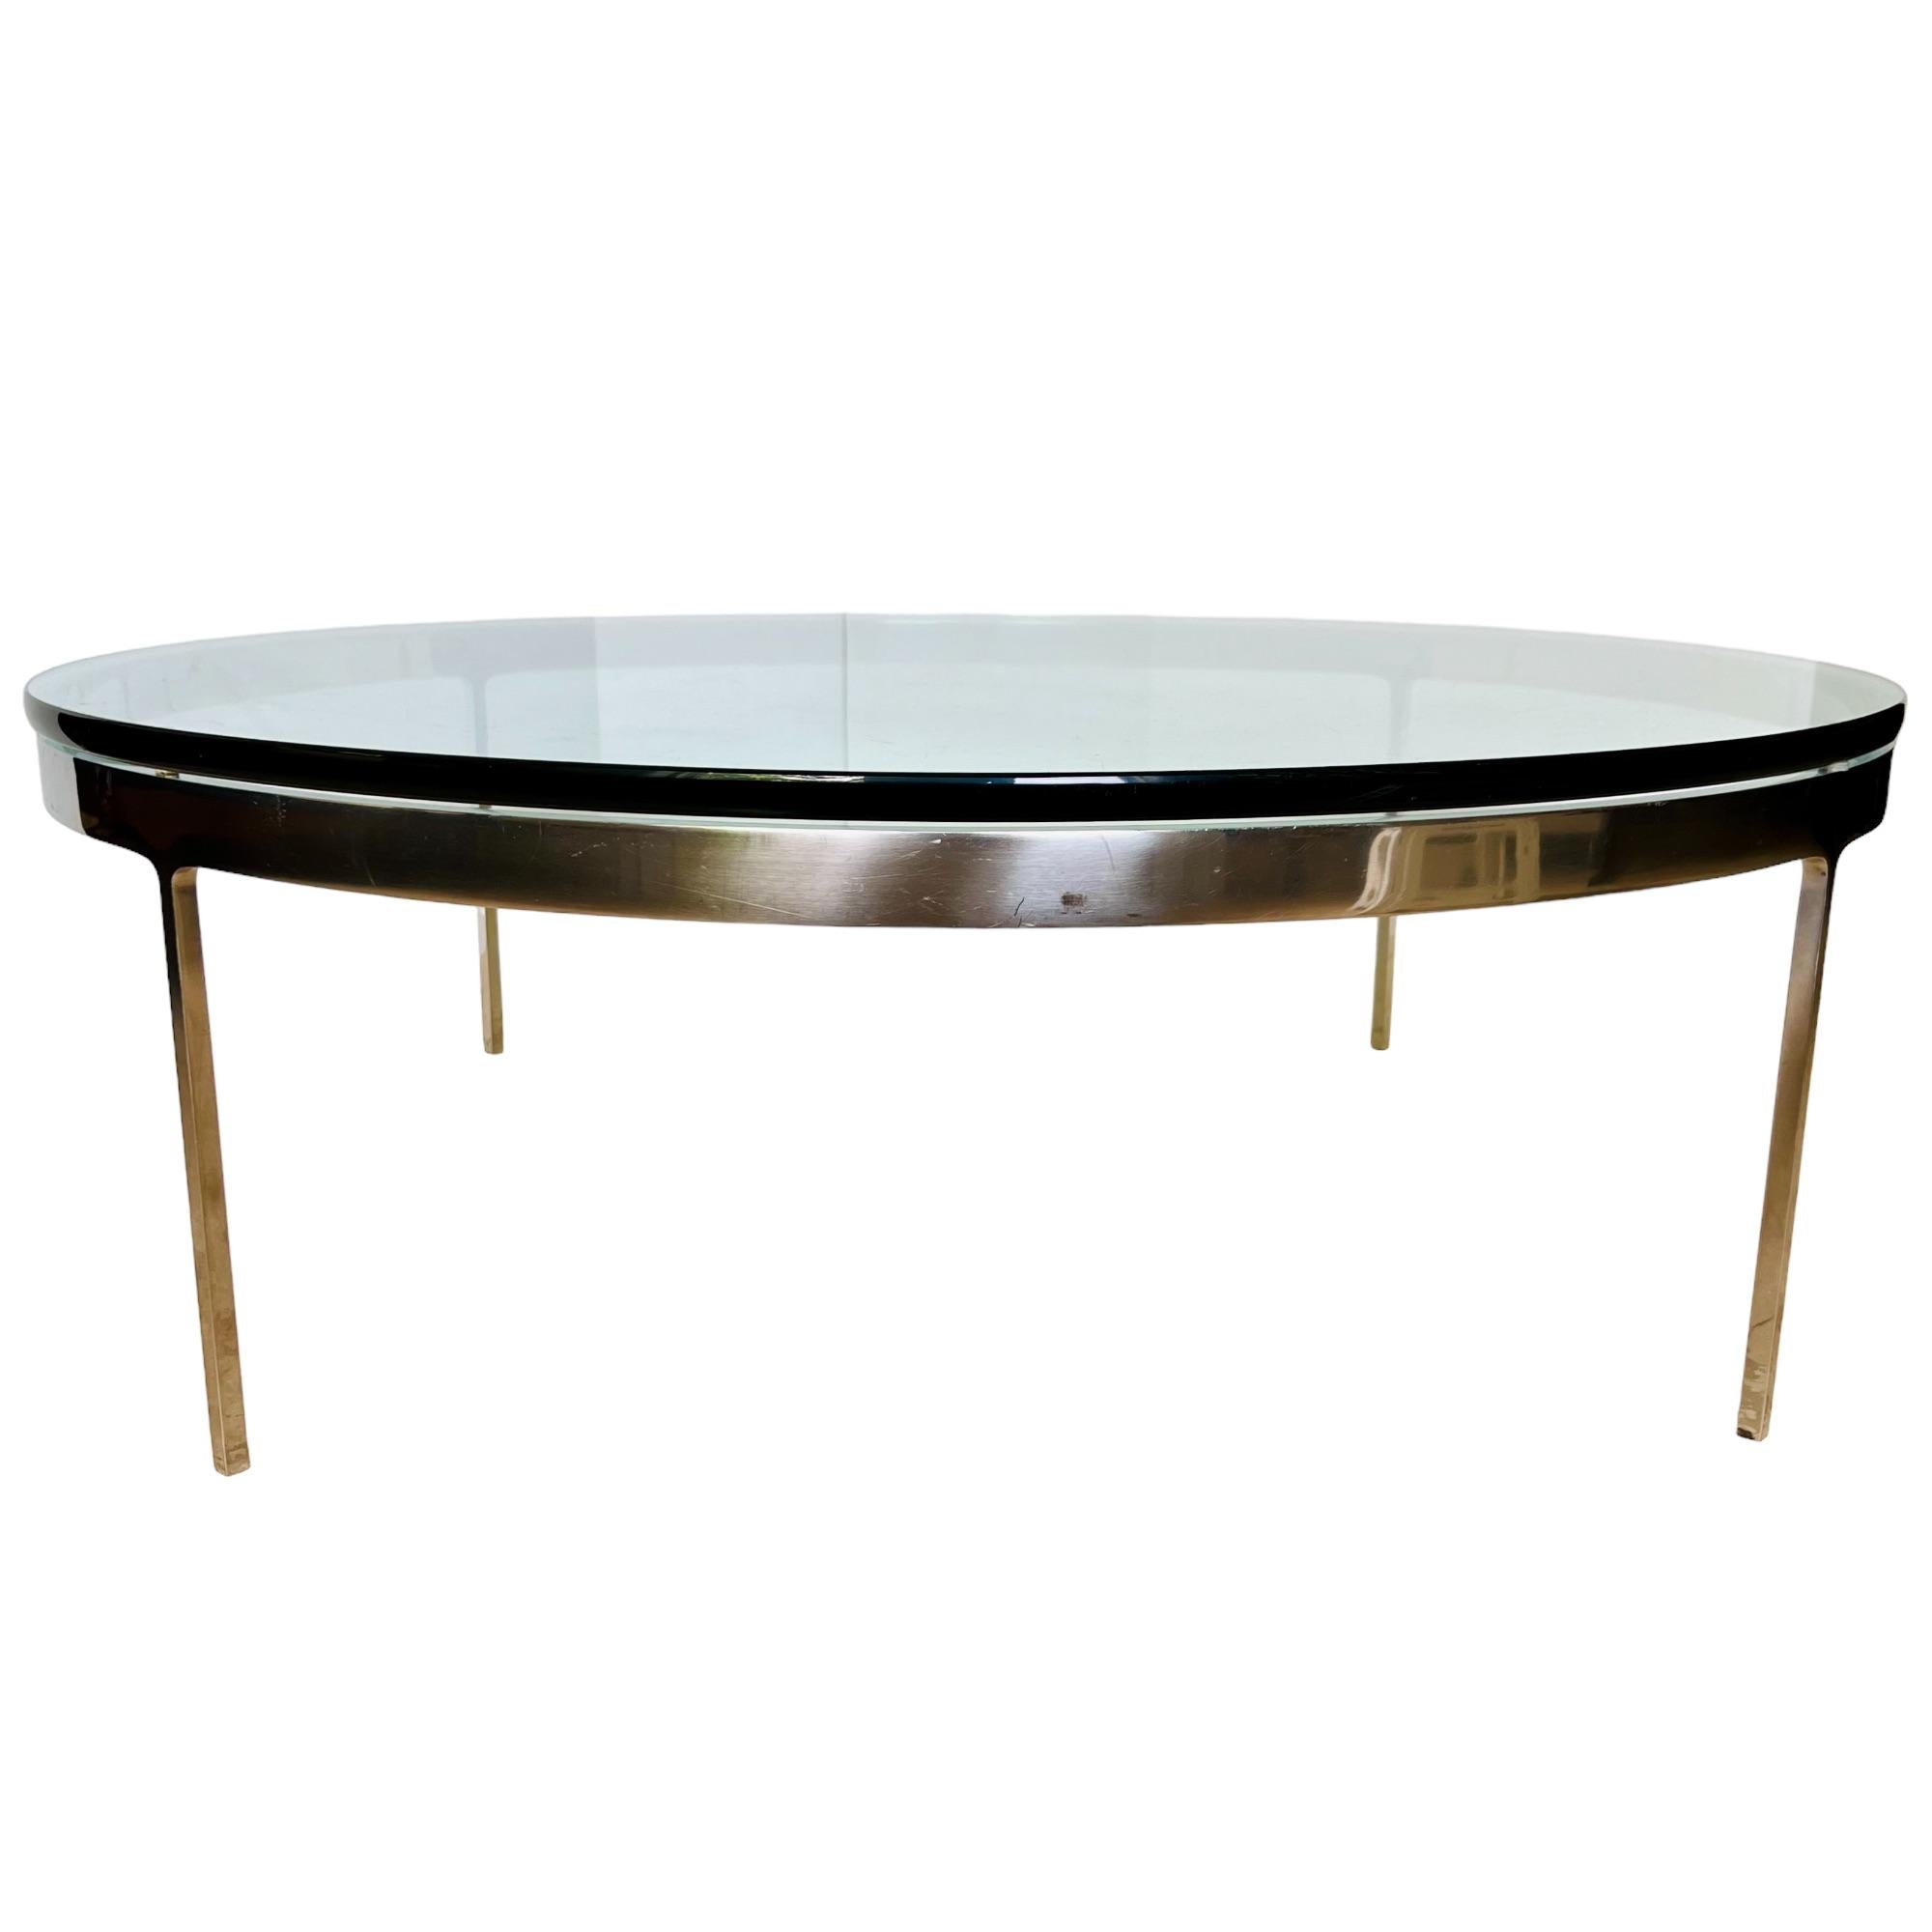 A vintage mid-century modern low round table attributed to Nicos Zographos of the TA35 line circa 1960. Seamless design stainless steel frame with stiletto legs and a 3/4